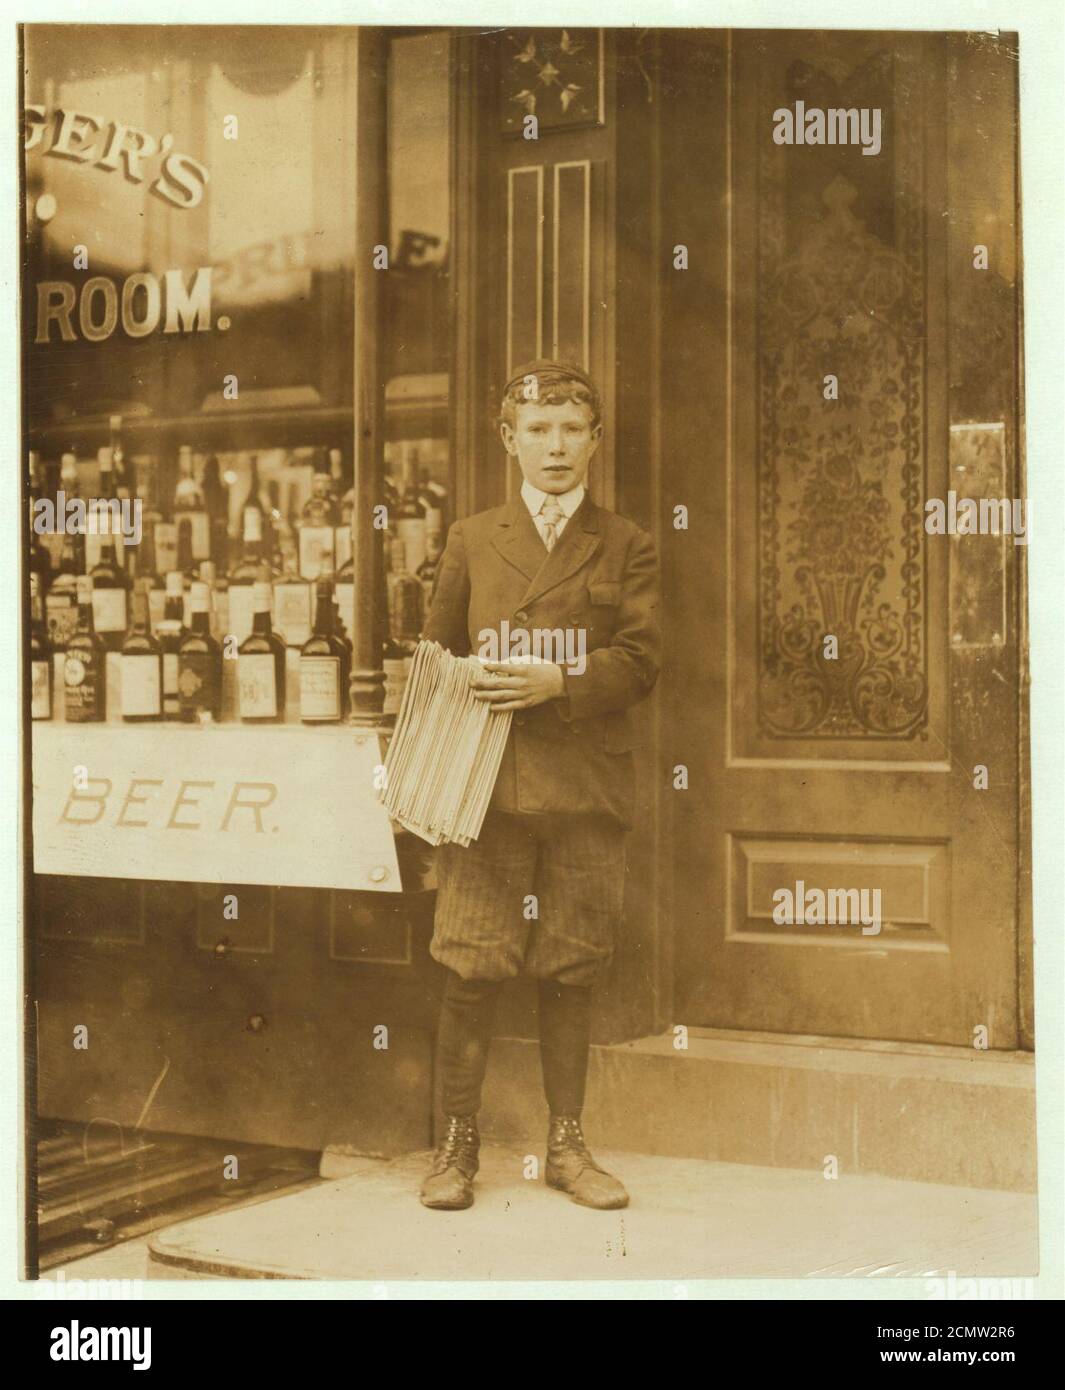 John Gibson, Newsboy, 13 years of age. Selling newspapers 7 years. Average earnings $1.25 per week. Selling newspapers own choice. Smokes. Visits saloons. Works 9 hours per day. John's Stock Photo